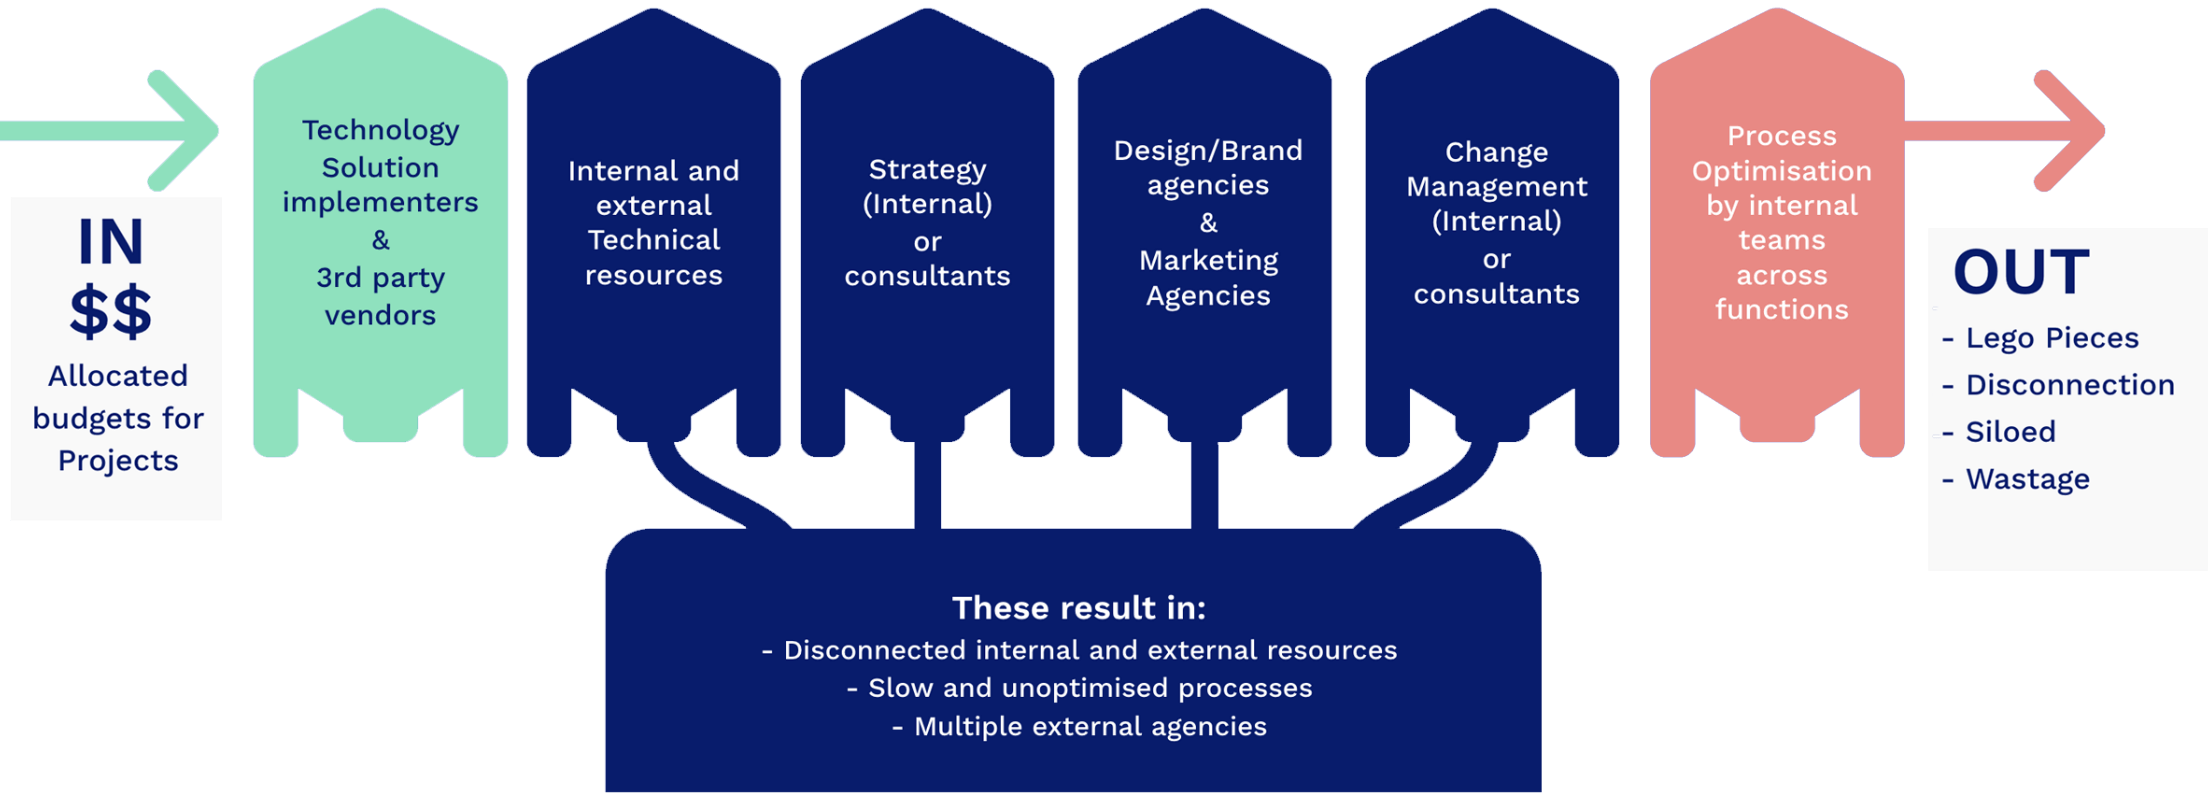 "An informative slide titled 'Helping companies experiencing growing pain with siloed, unoptimised systems', describing the challenges faced by scale-ups and medium-sized enterprises undergoing a transformation. On the left, there's an 'IN' arrow indicating 'Allocated budgets for Projects', which leads to inputs like 'Technology Solution implementation & 3rd party vendors', 'Internal and external Technical resources', 'Strategy (Internal) or consultants', 'Design/Brand agencies & Marketing Agencies', and 'Change Management (Internal) or consultants'. These inputs flow into 'Process Optimisation by internal teams across functions', which then leads to an 'OUT' arrow, highlighting outputs such as 'Lego Pieces - Disconnection', 'Siloed', and 'Wastage'. The slide emphasizes that these result in disconnected internal and external resources, slow and unoptimised processes, and multiple external agencies. The slide is colored in shades of blue and green with white and yellow text